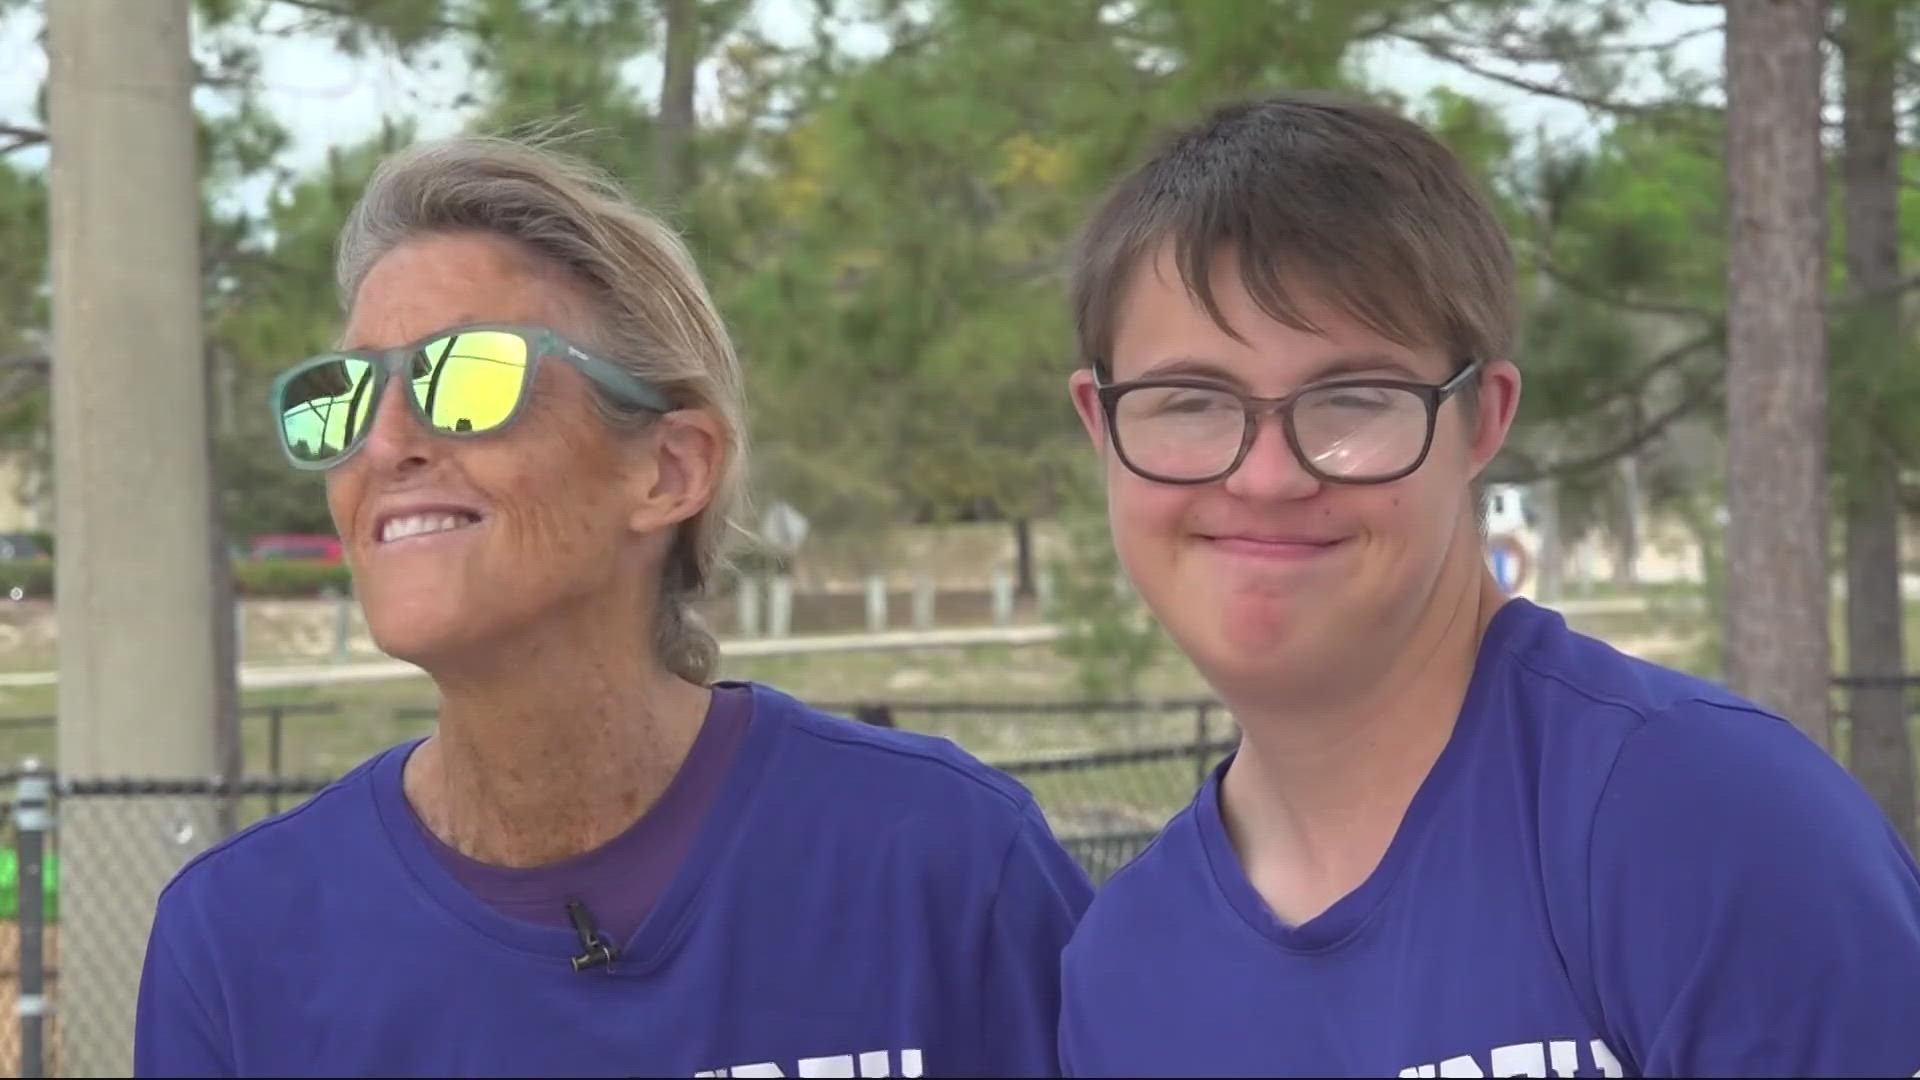 Having Down syndrome has never stopped Caleb from achieving his goals.